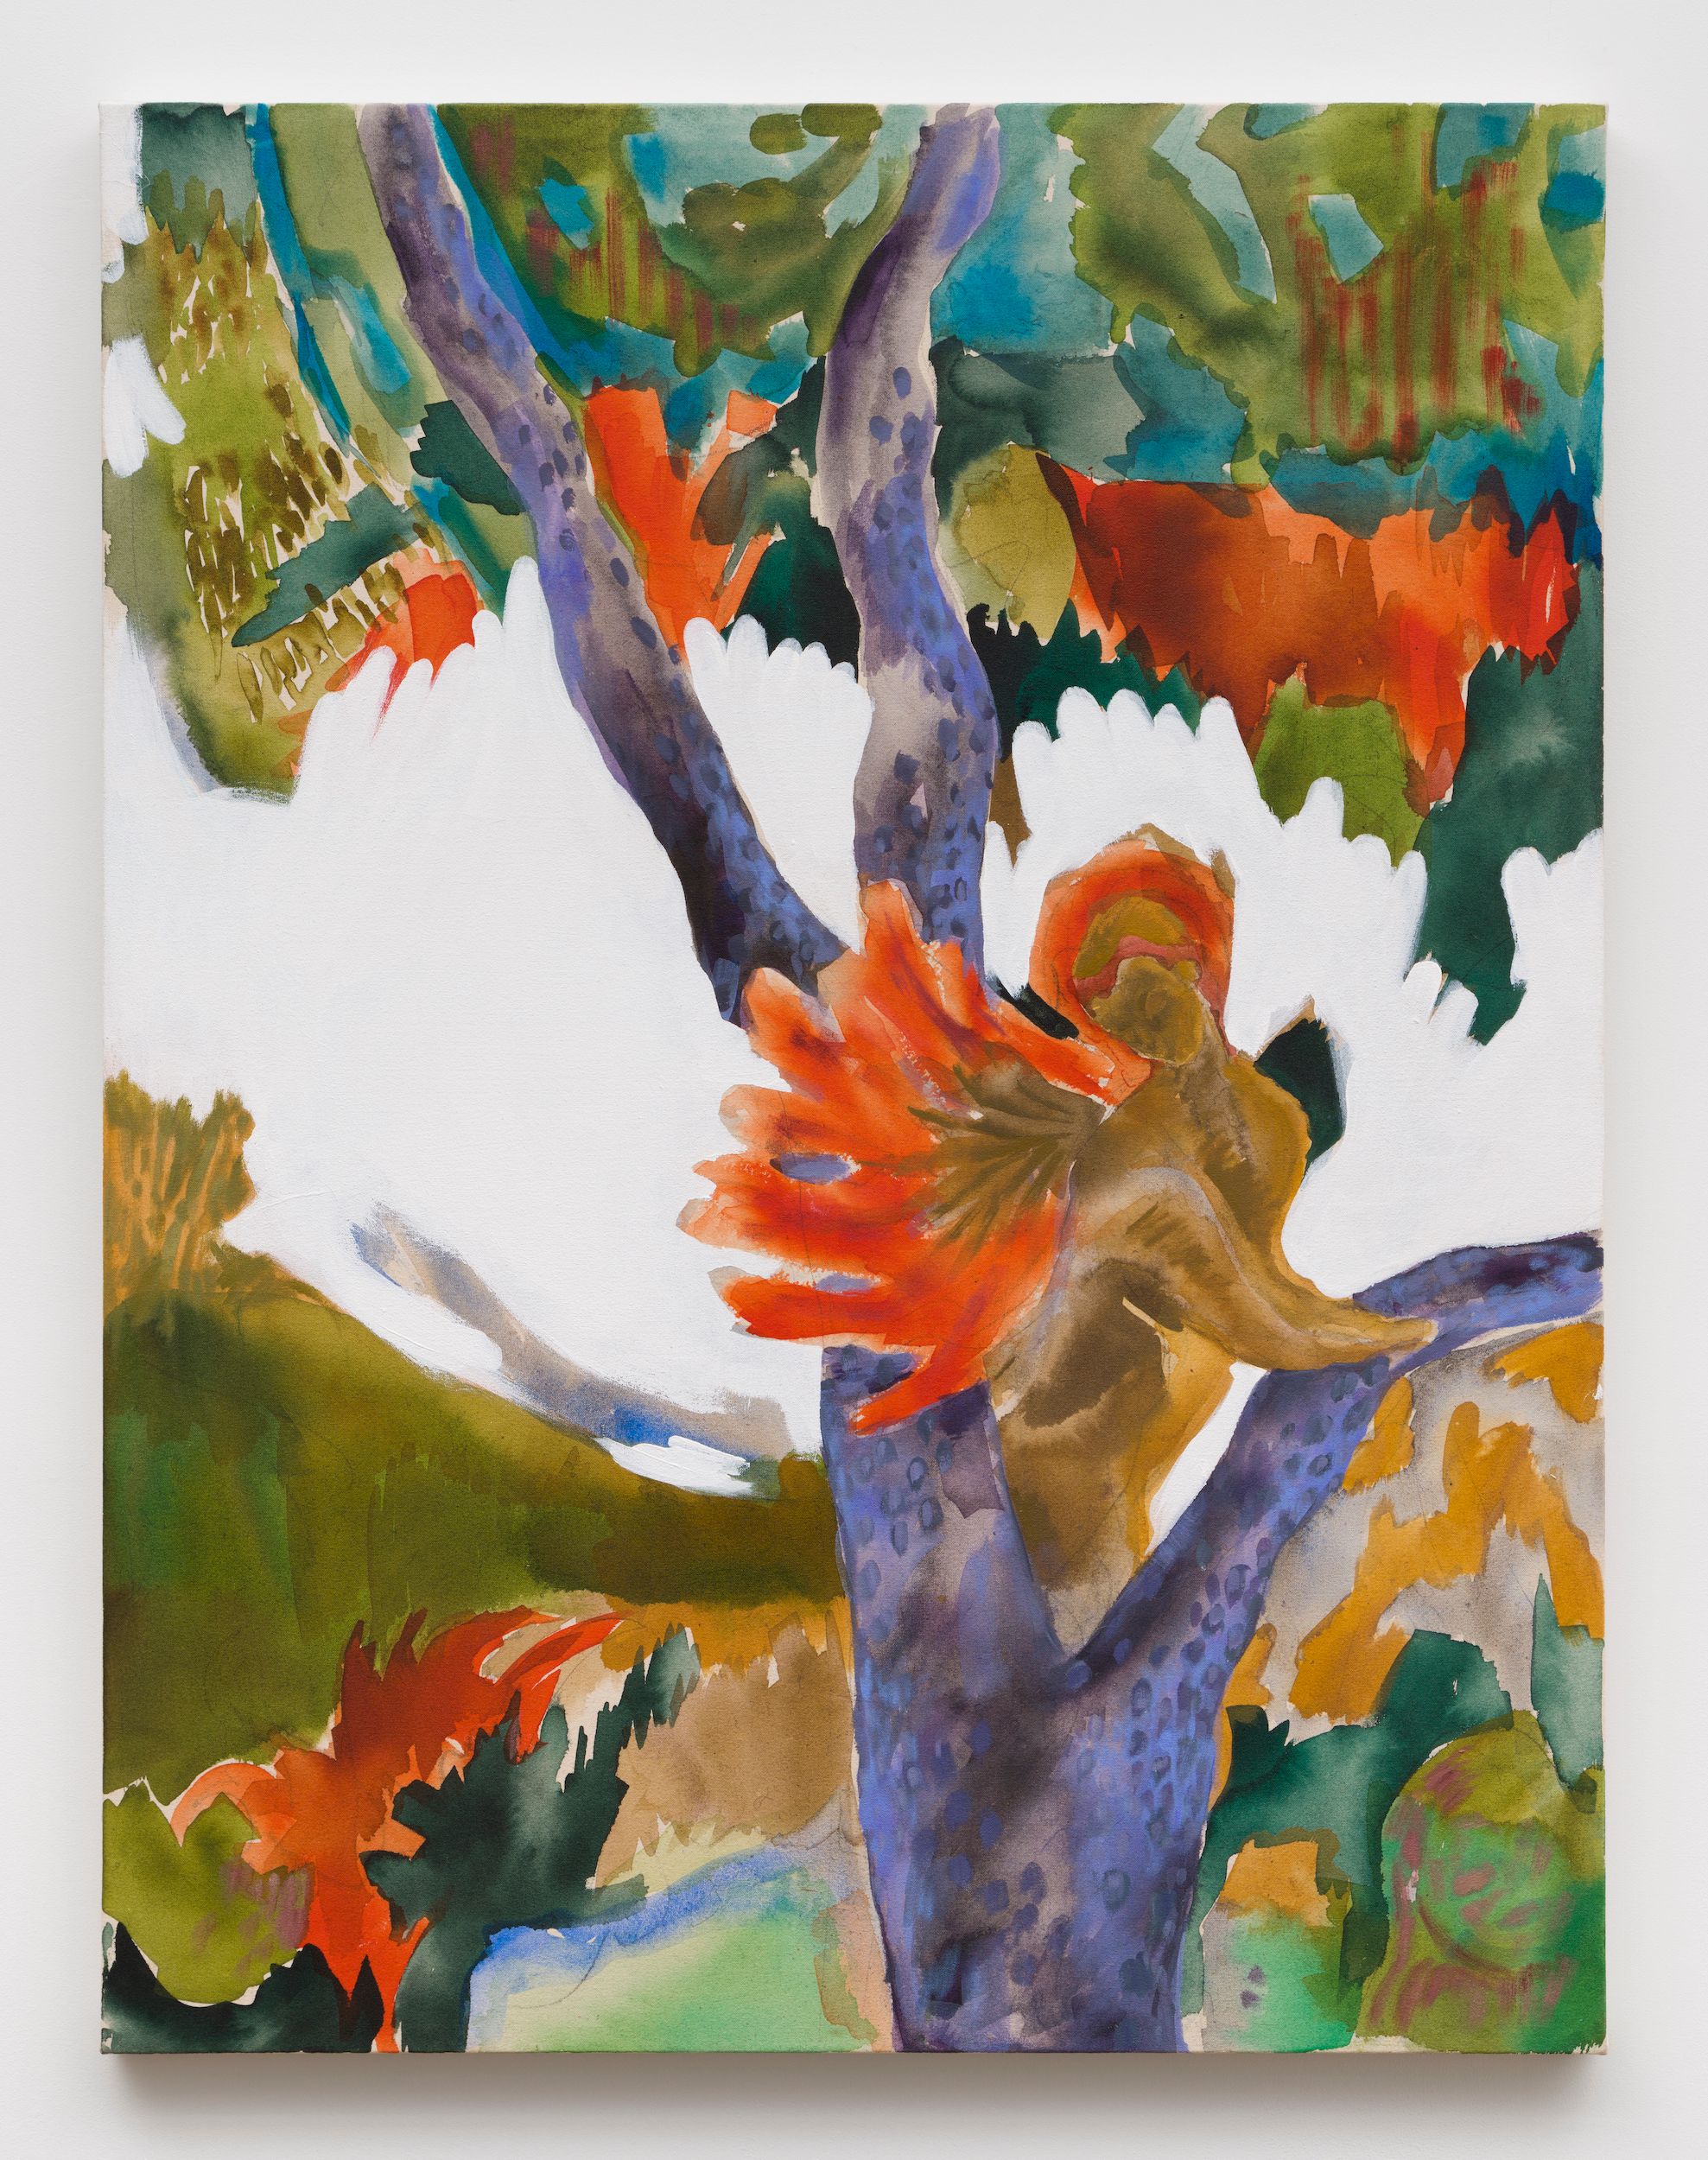 geetha thurairajah, Untitled (woman in tree), 2022, acrylic and oil on canvas, 48 x 37 in. (121.92 x 93.98 cm)